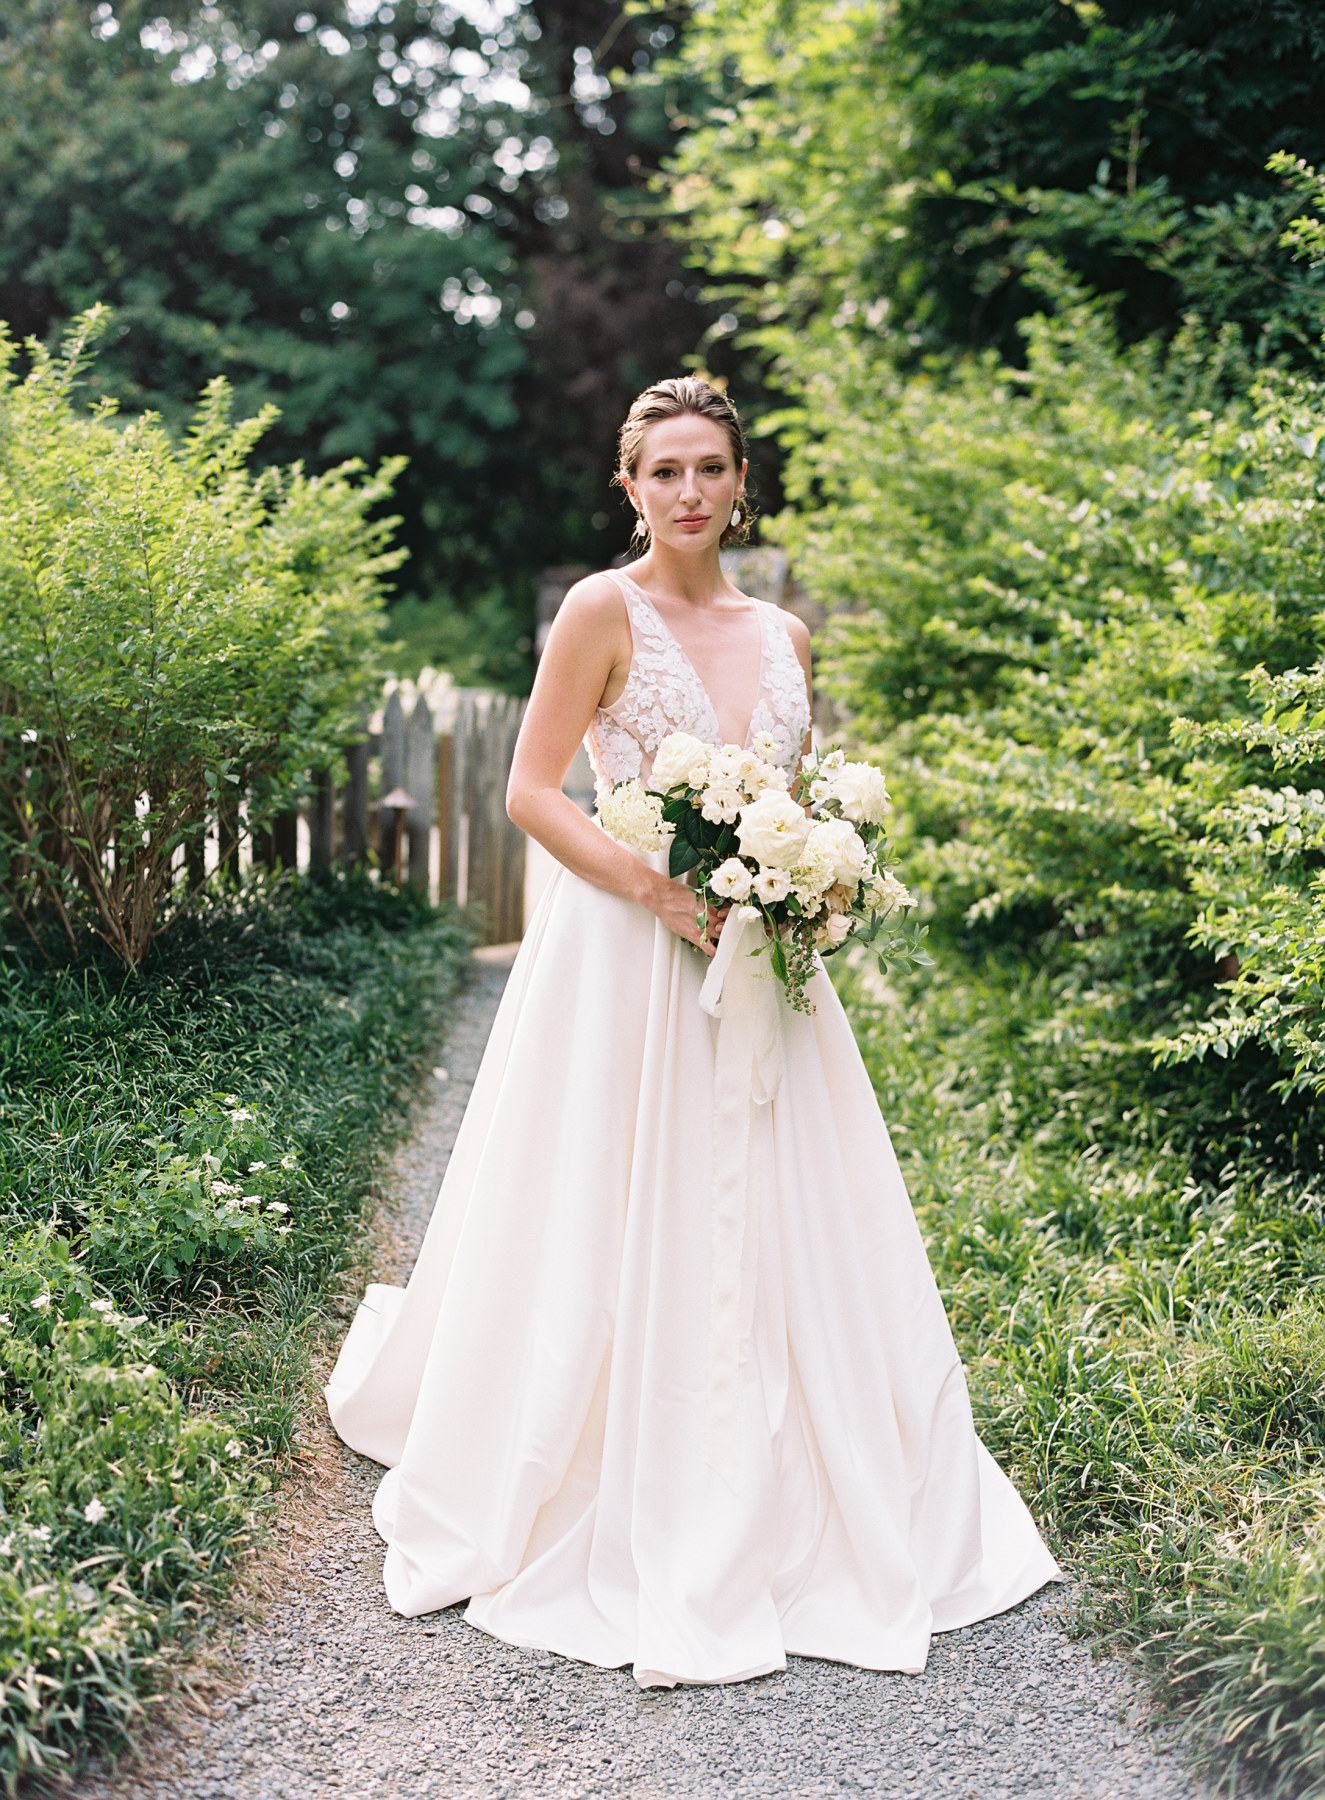 Outdoor, intimate wedding inspiration at The Clifton | Charlottesville ...